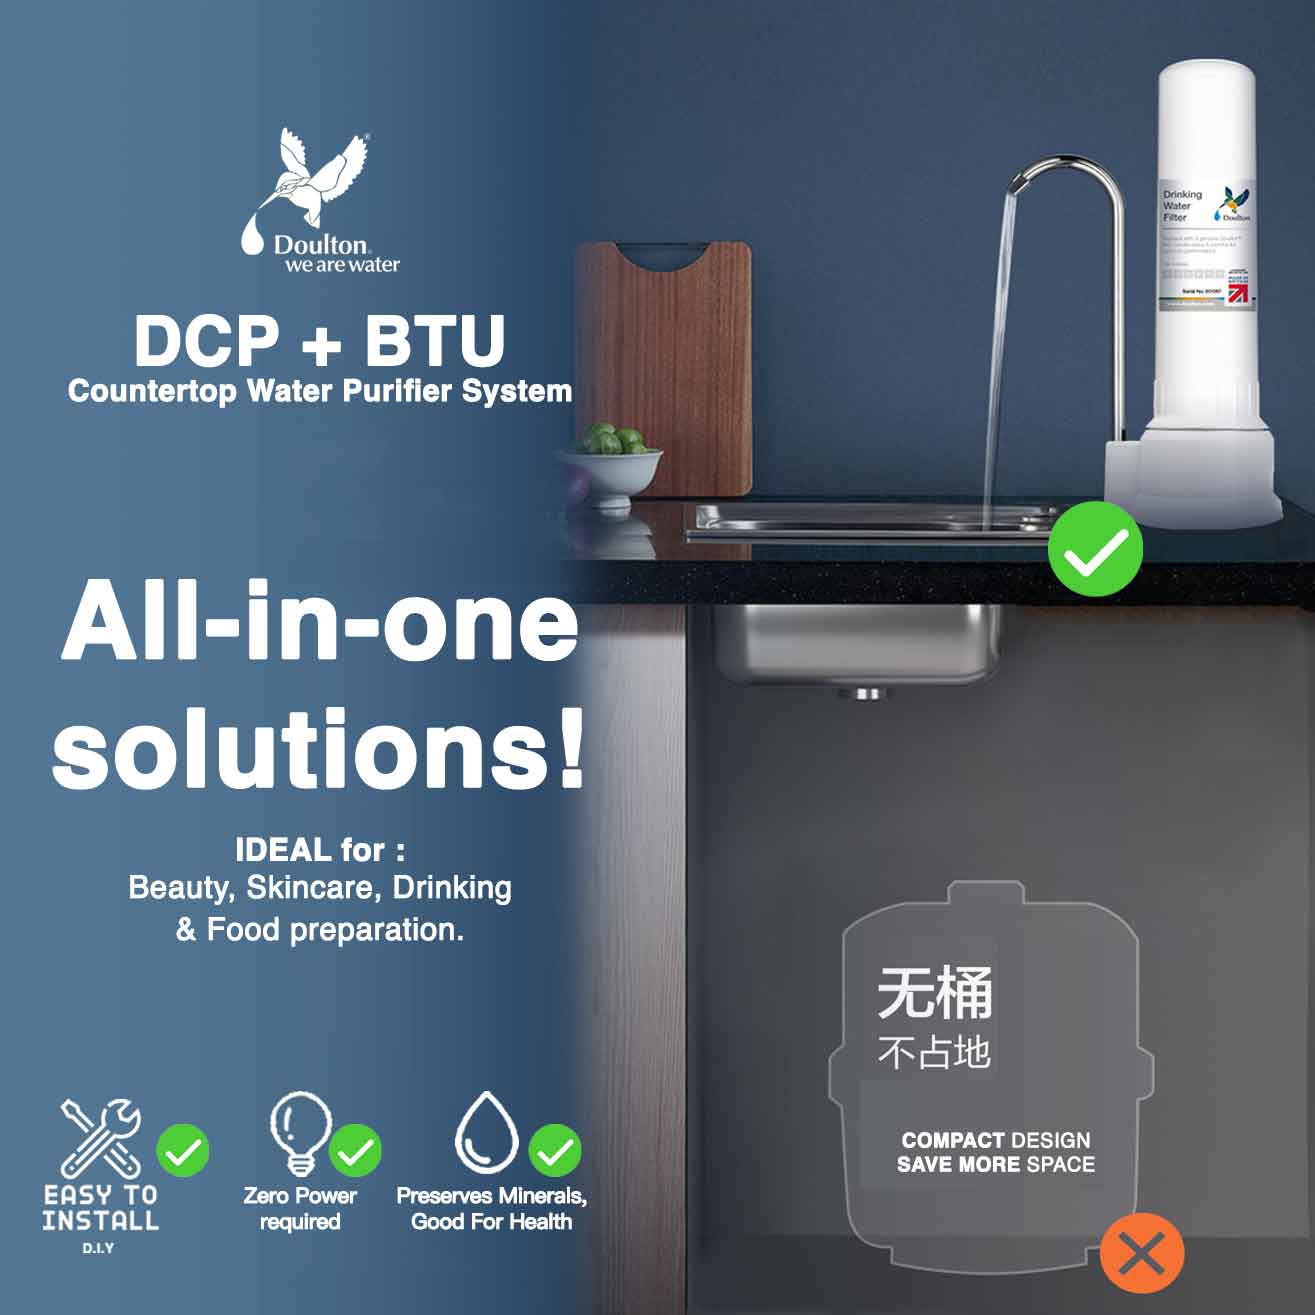 Revolutionise Your Water Experience with the Doulton DCP Biotect Ultra Countertop Drinking Water Purifier: The Ultimate 4 stages of filtration System for Precision Filtration, Proudly Made in Britain Since 1826! FREE 2nd Year BTU Filter!